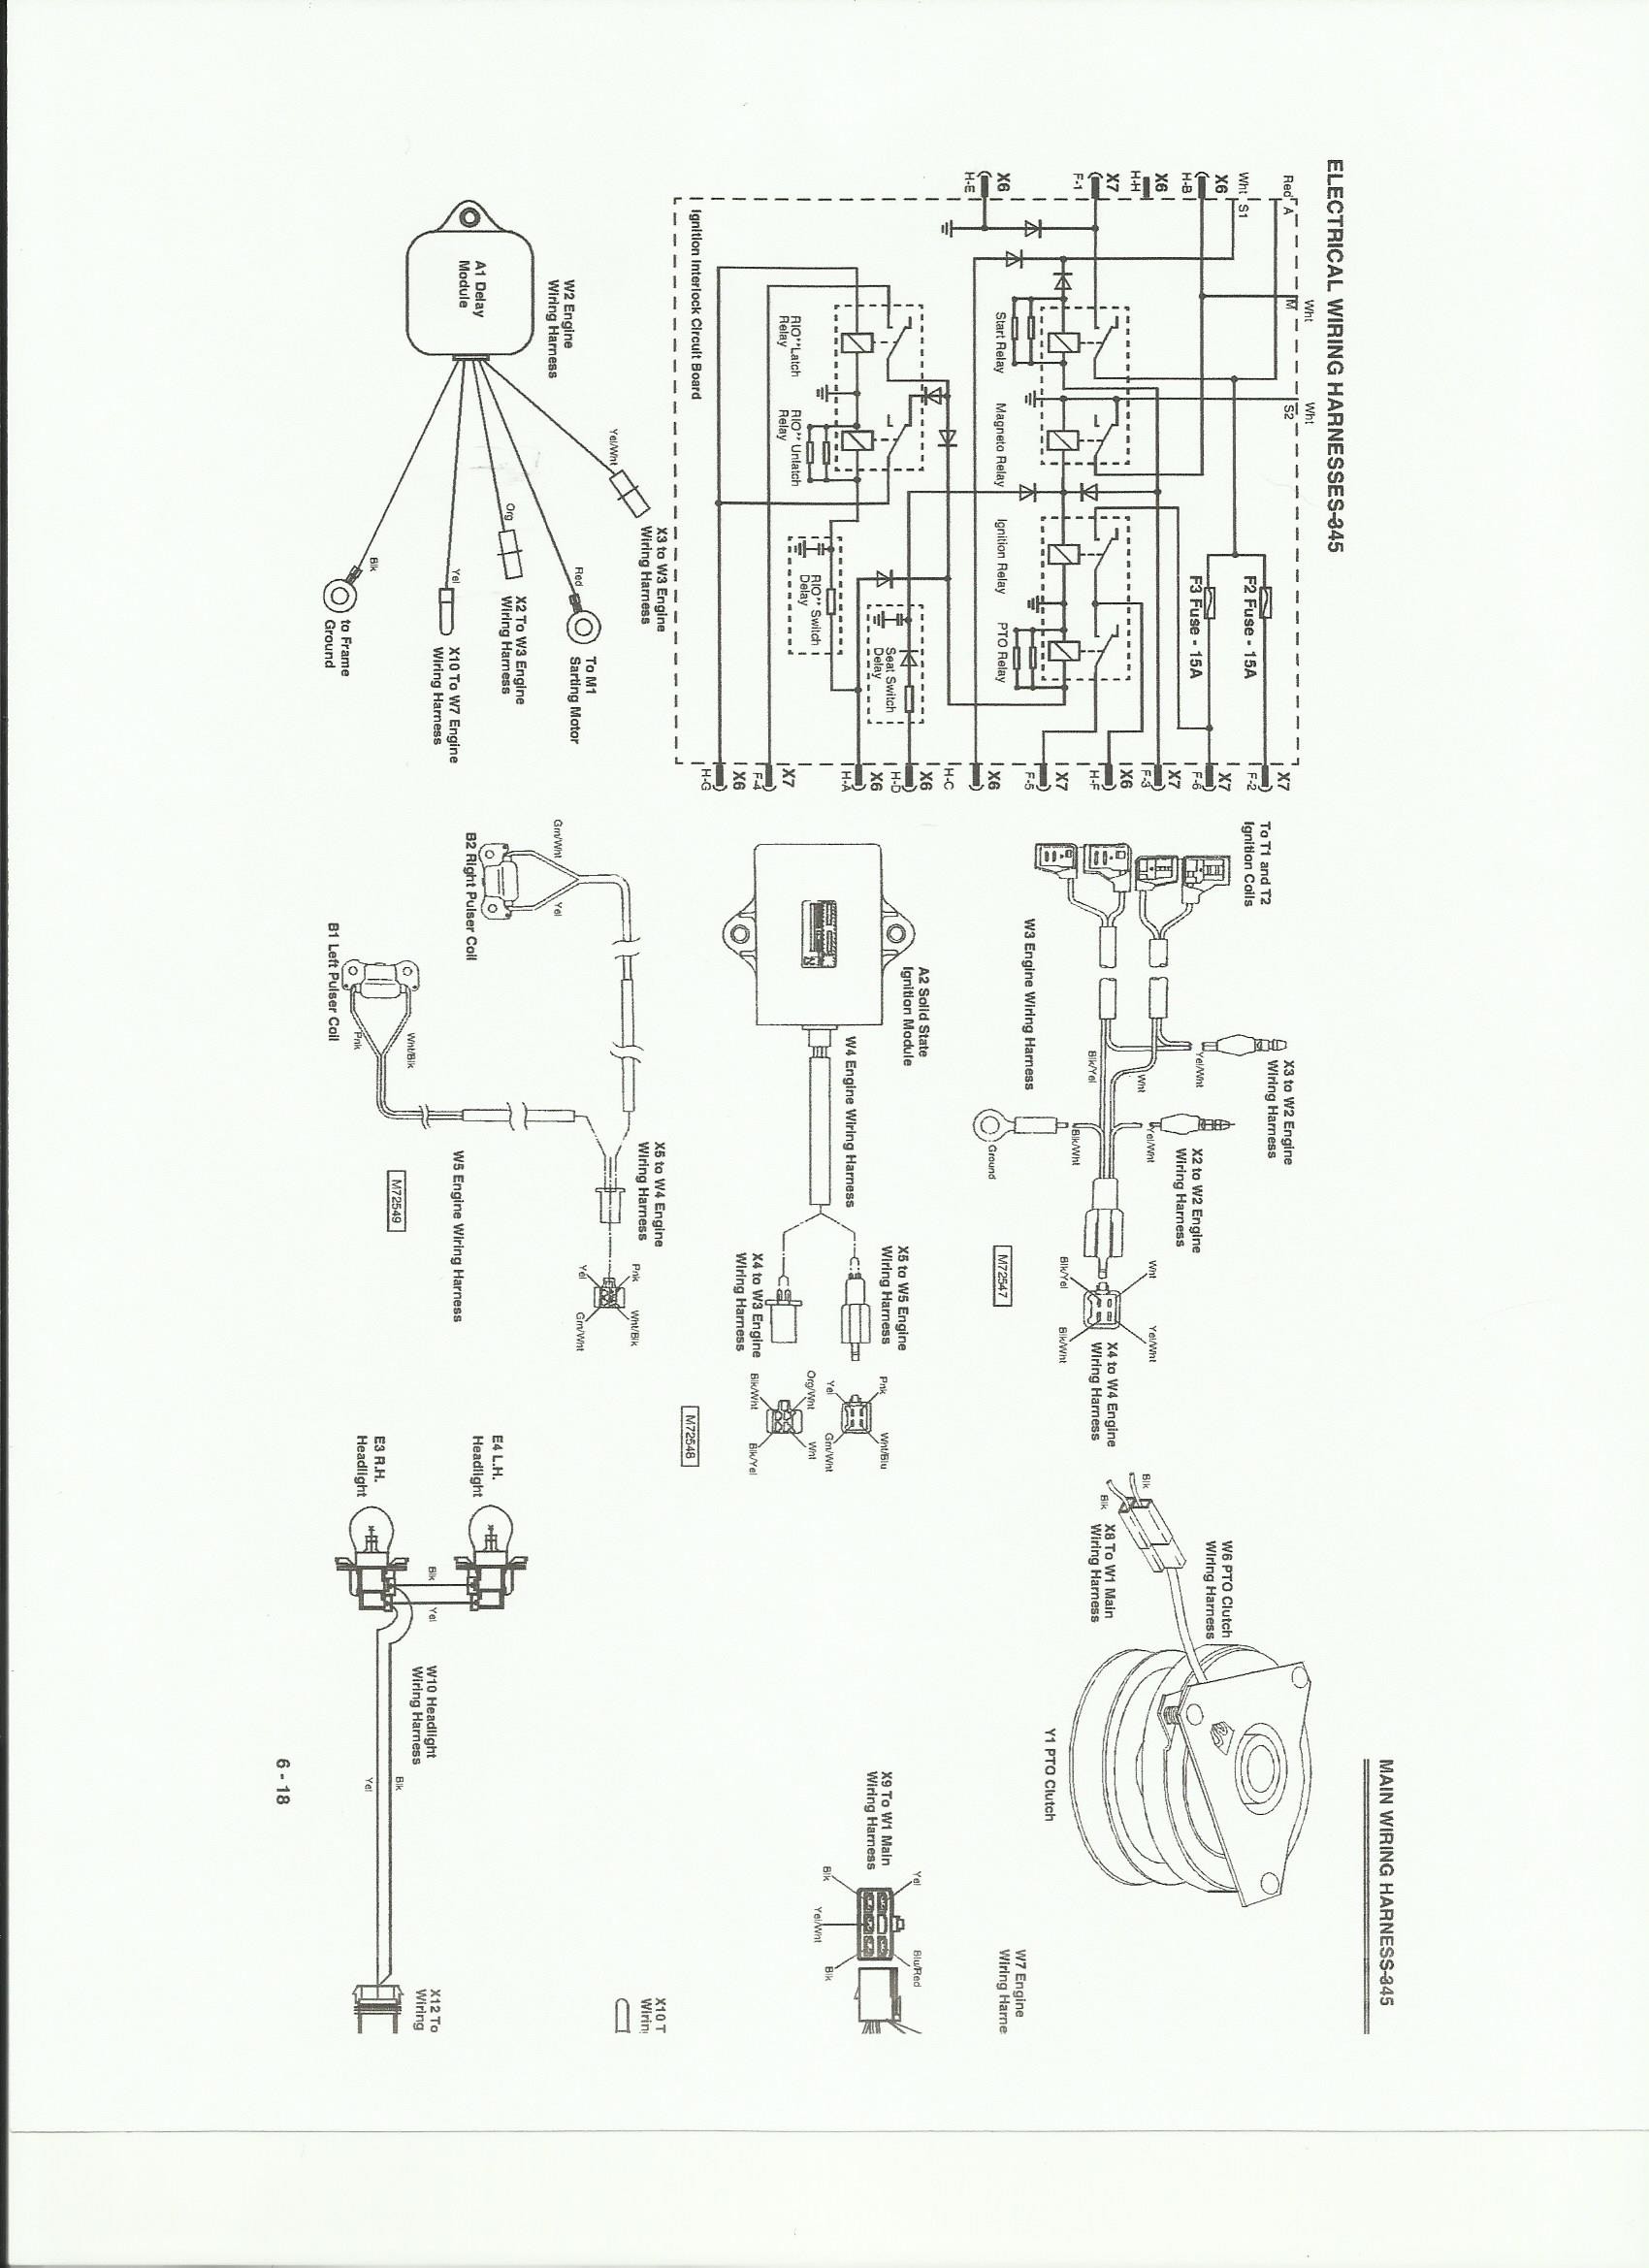 Wireing Diagram for John Deere 345 Need A 345 Wiring Diagram Pdf Please Of Wireing Diagram for John Deere 345